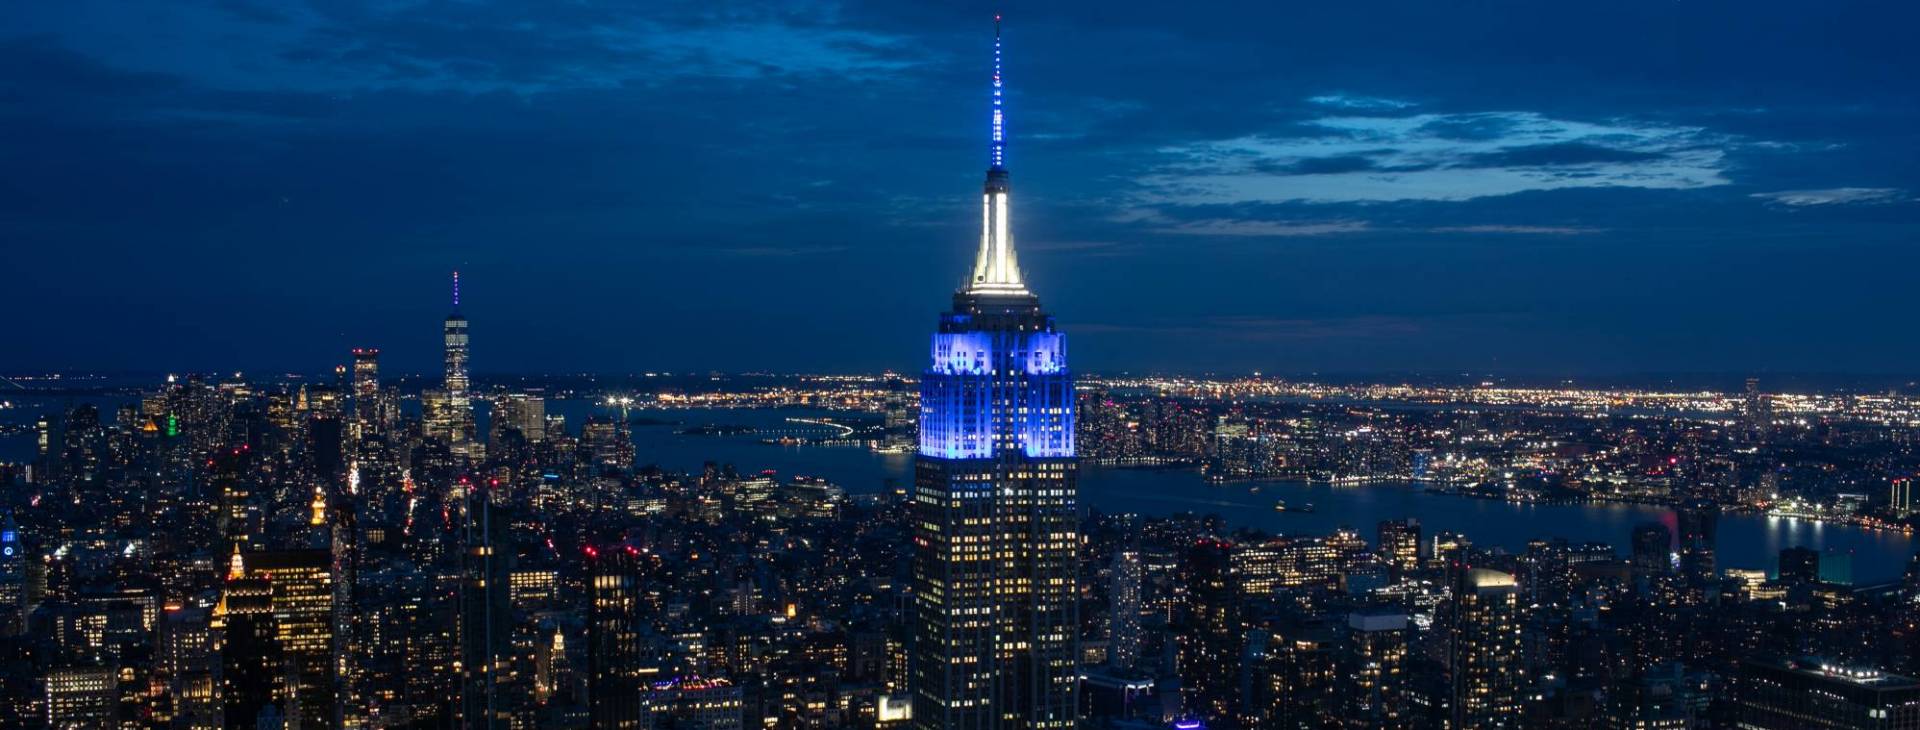 The Empire State Building lit up in blue and white honoring Columbia graduates.